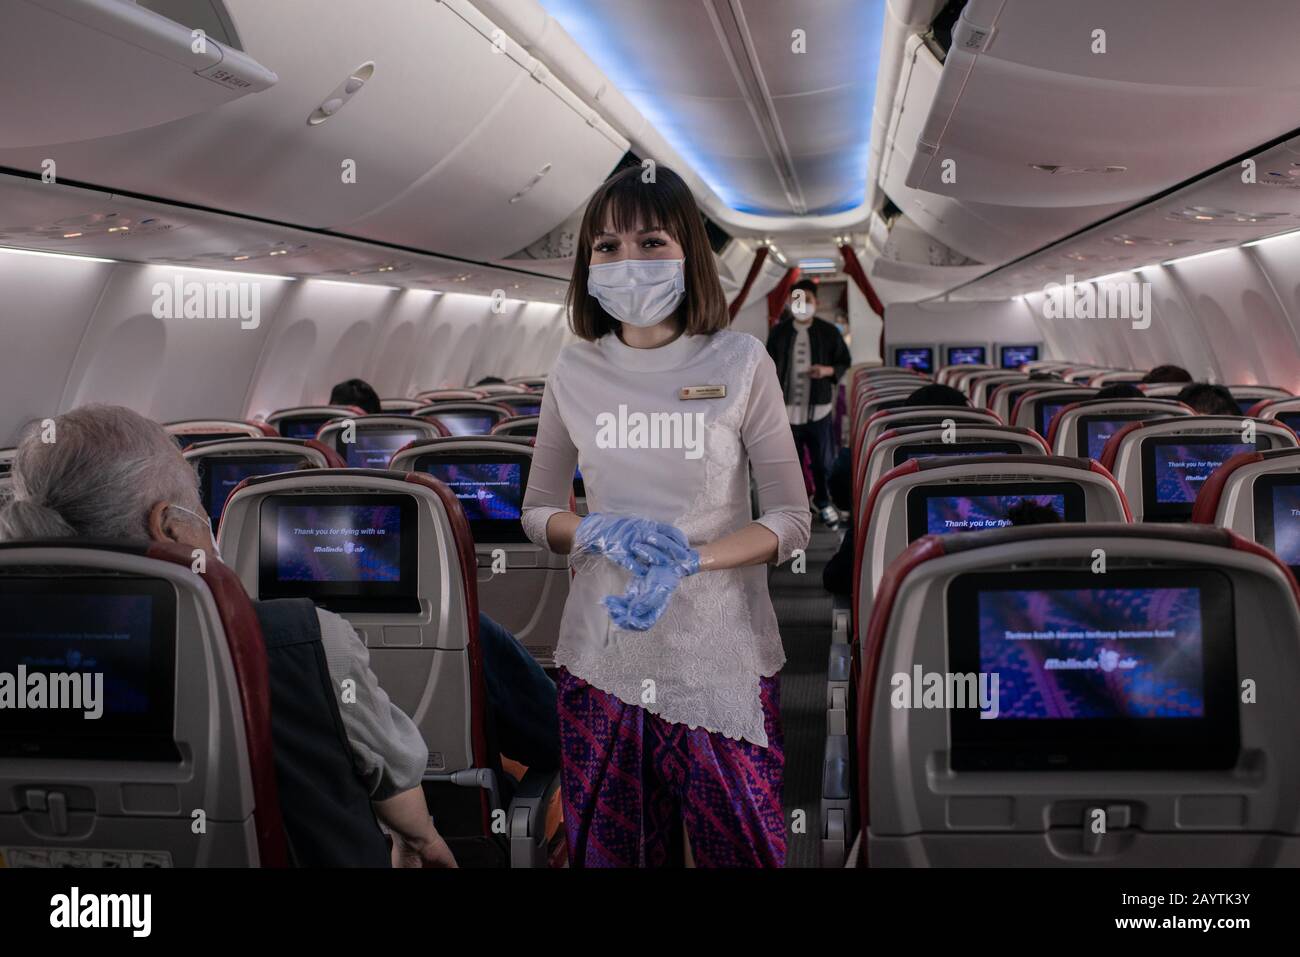 Hong Kong, China. 14th Feb, 2020. An airline staff wears surgical mask inside an airplane at the Hong Kong International Airport.As the number of victims of the new Coronavirus increases, more countries cancel flights within and without the region. Credit: Ivan Abreu/SOPA Images/ZUMA Wire/Alamy Live News Stock Photo